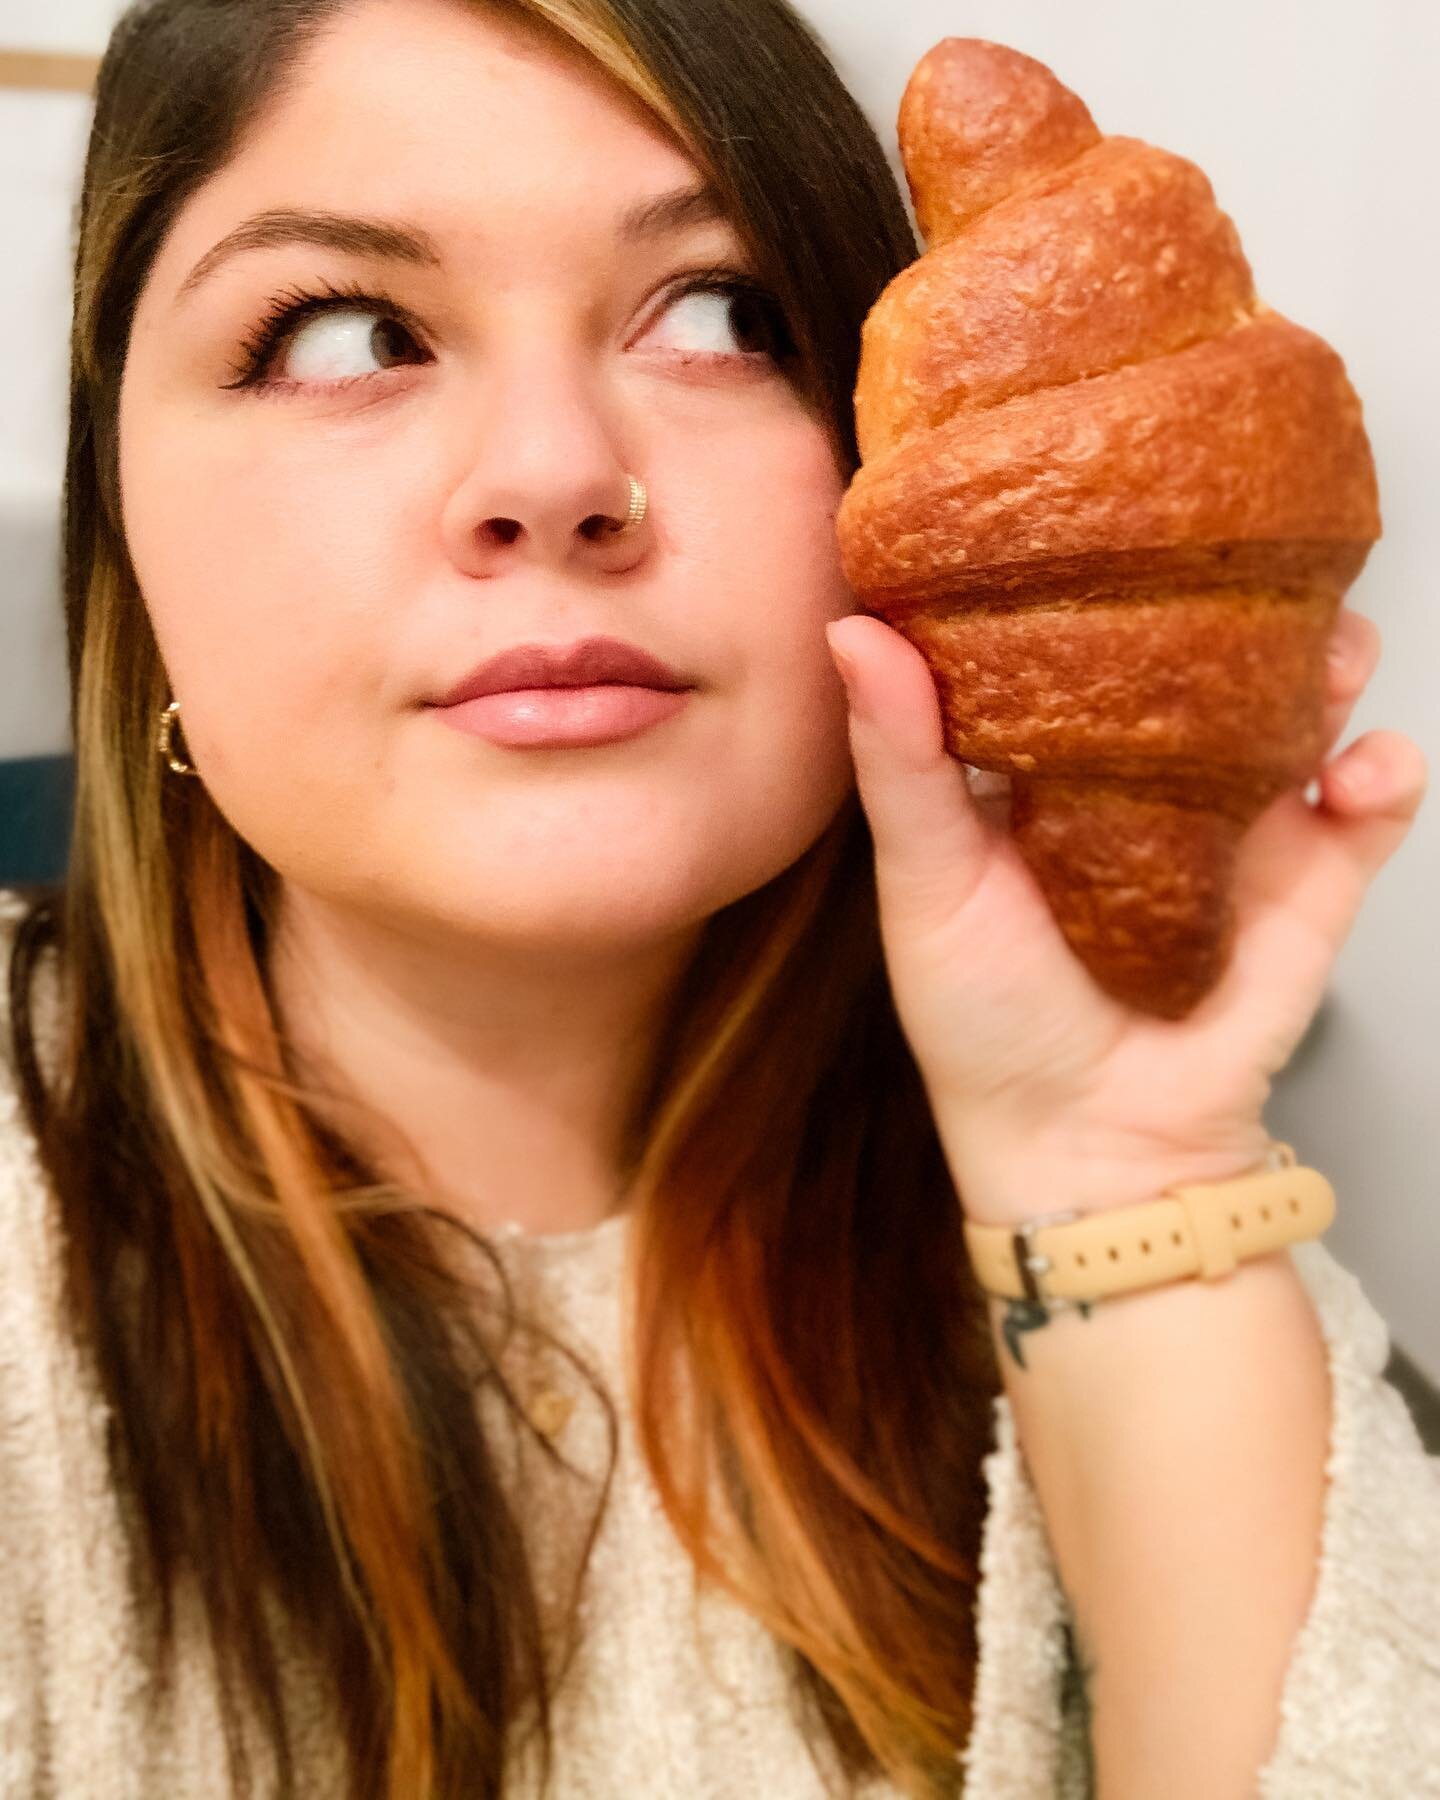 Bonjour from me and a vegan croissant the size of my face 🥐 #vegan #luxembourg #veganluxembourg #itwaswholewheatwhichwasasurpriseandslightdissapointmentbutstillgoodtho #lecroissant